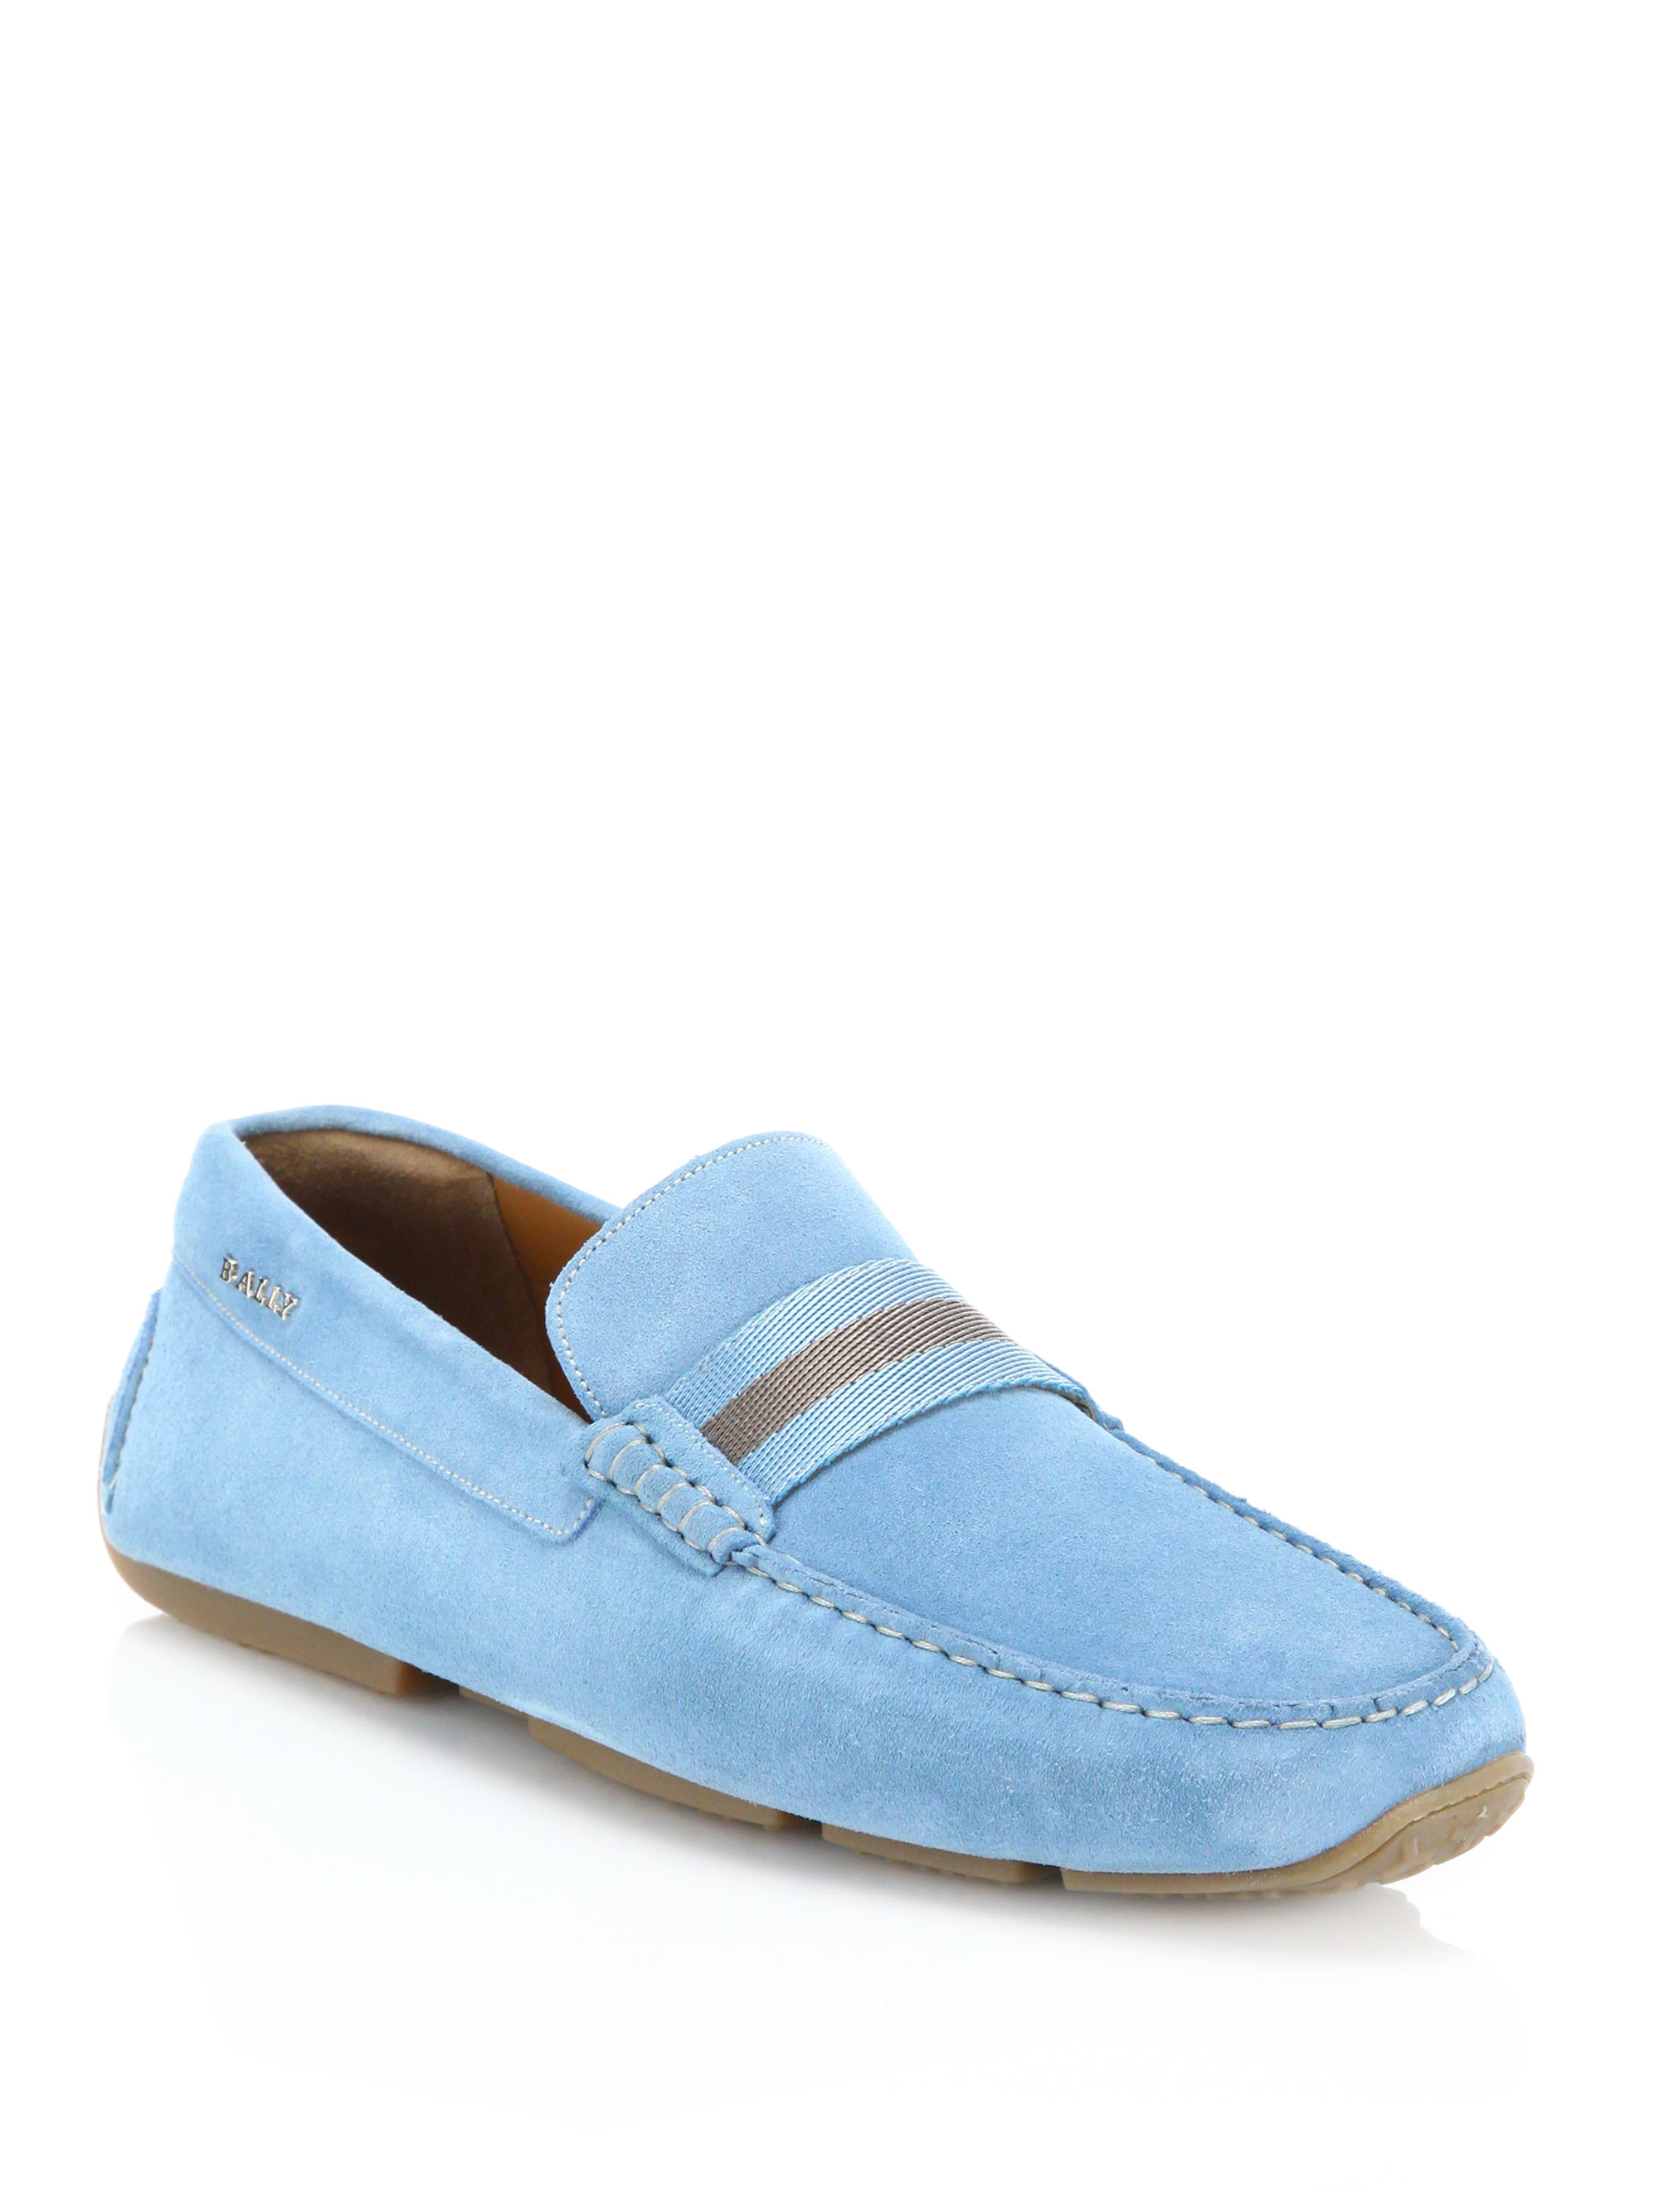 Bally Pearce Suede Drivers in Light Blue (Blue) for Men - Lyst